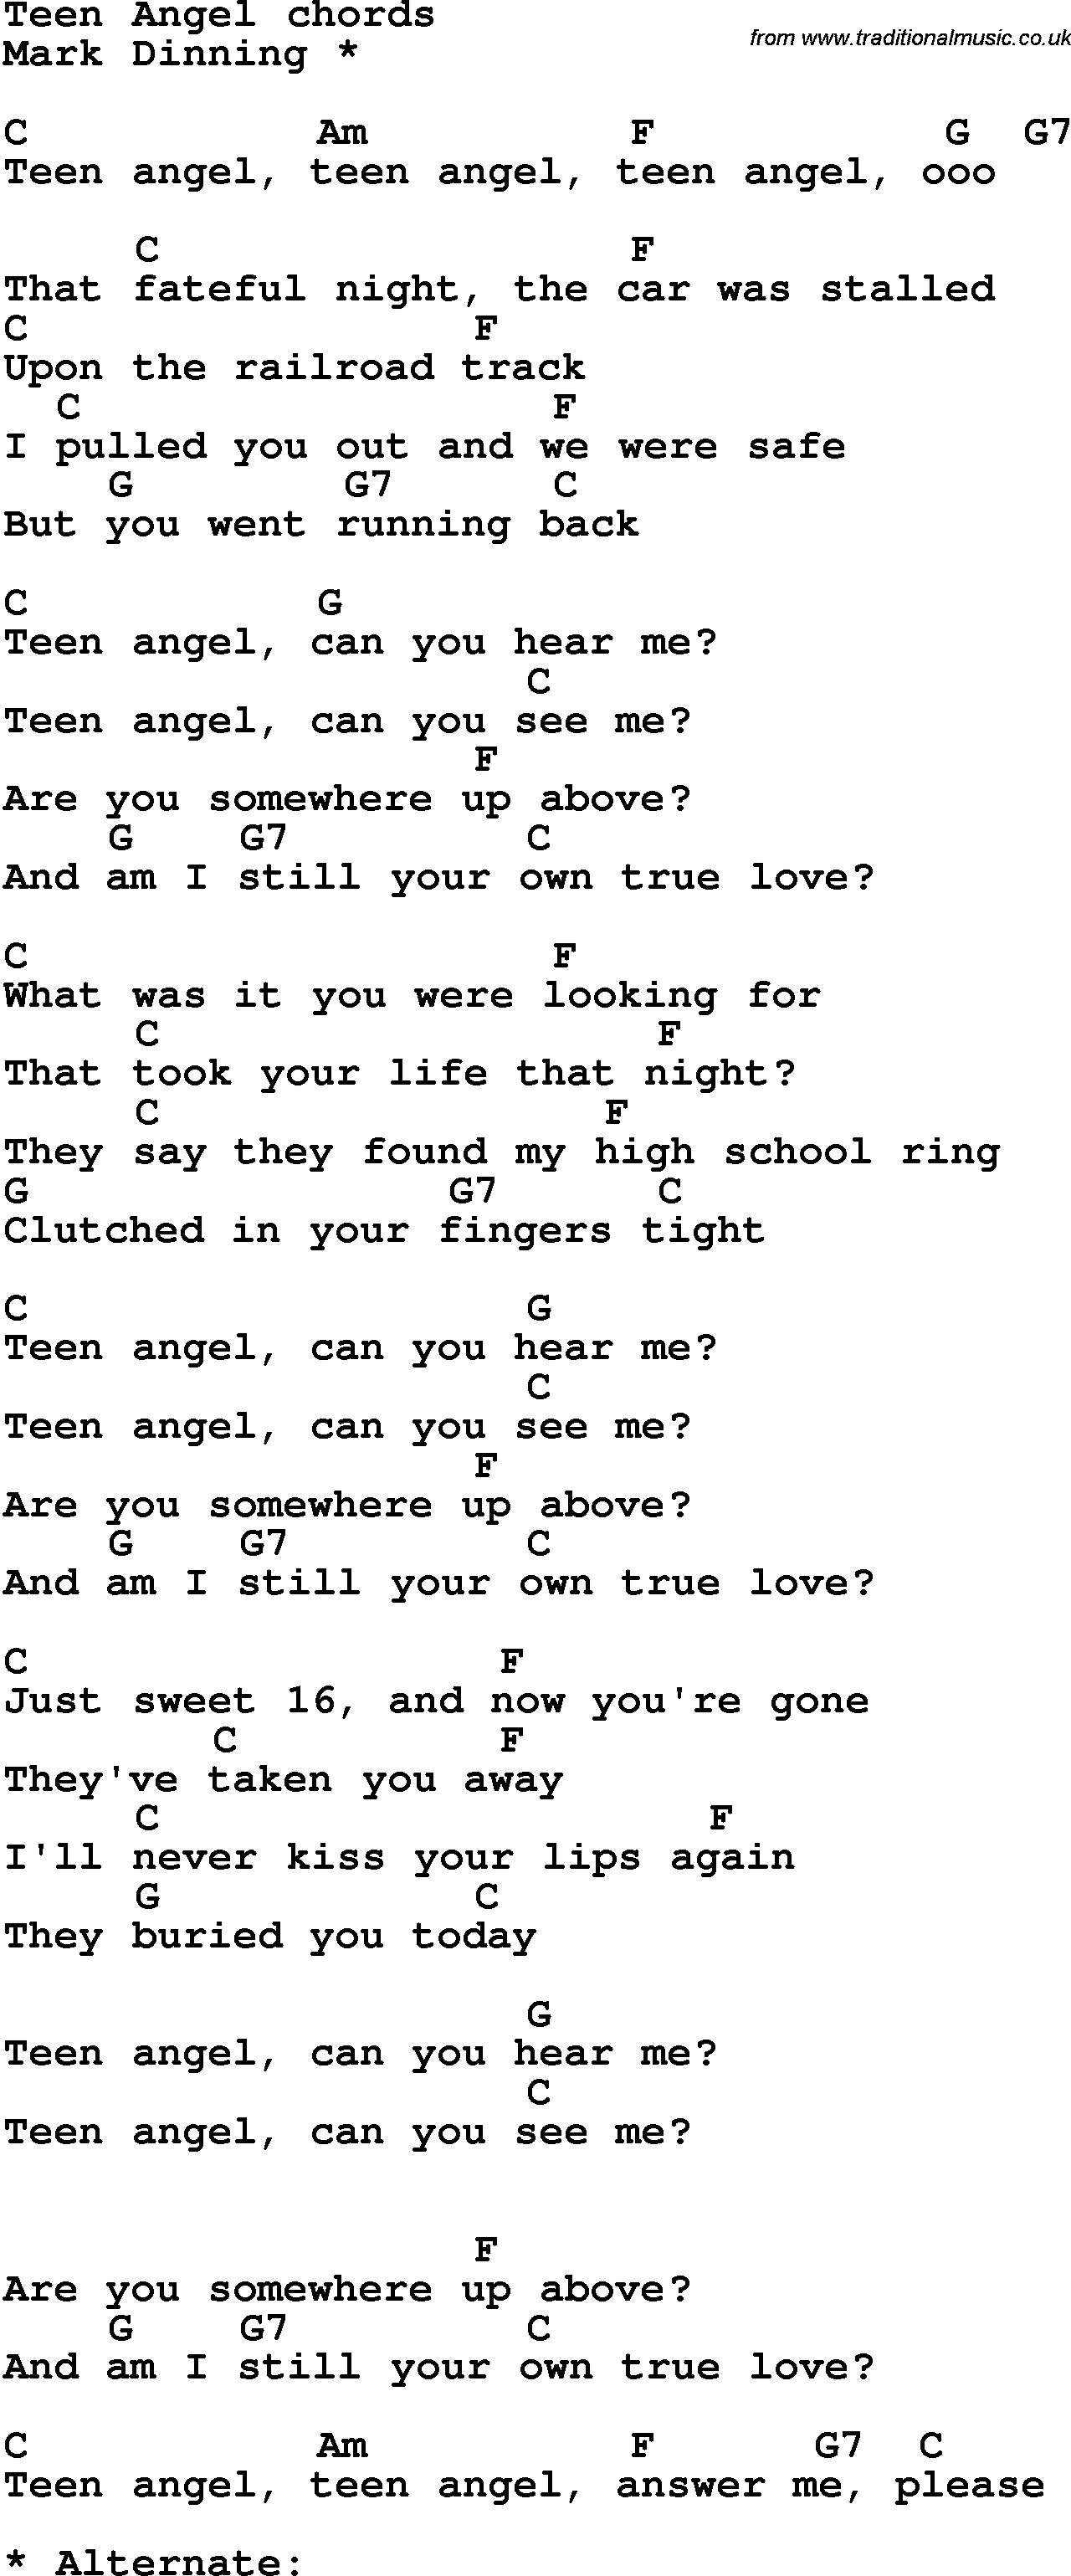 Song Lyrics with guitar chords for Teen Angel - Mark Dinning